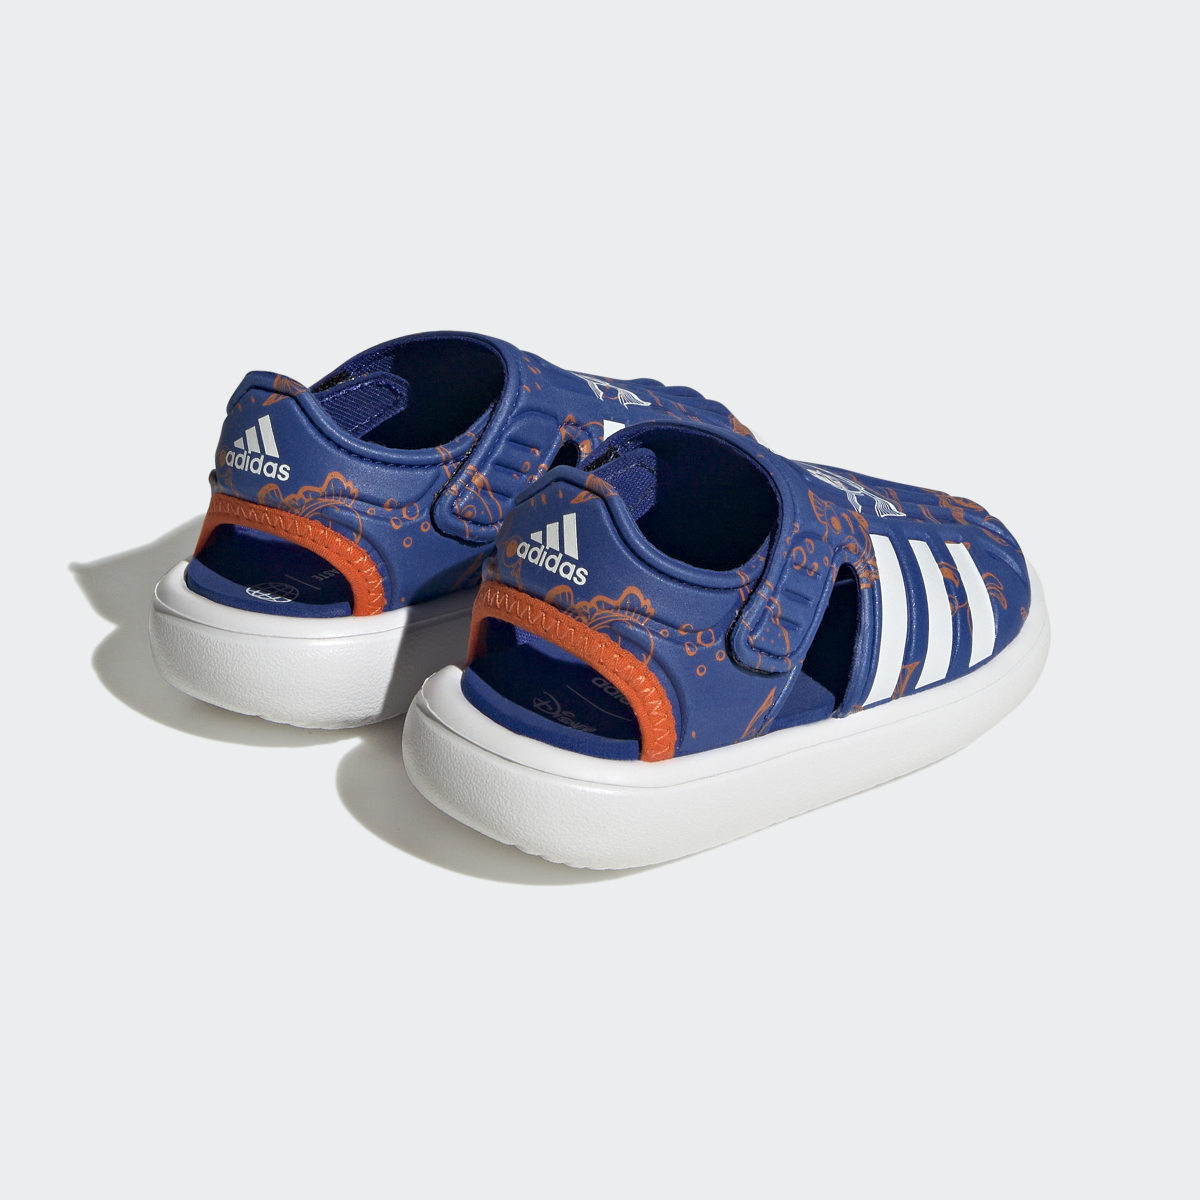 Adidas Sandali Finding Nemo and Dory Closed Toe Summer Water. 6